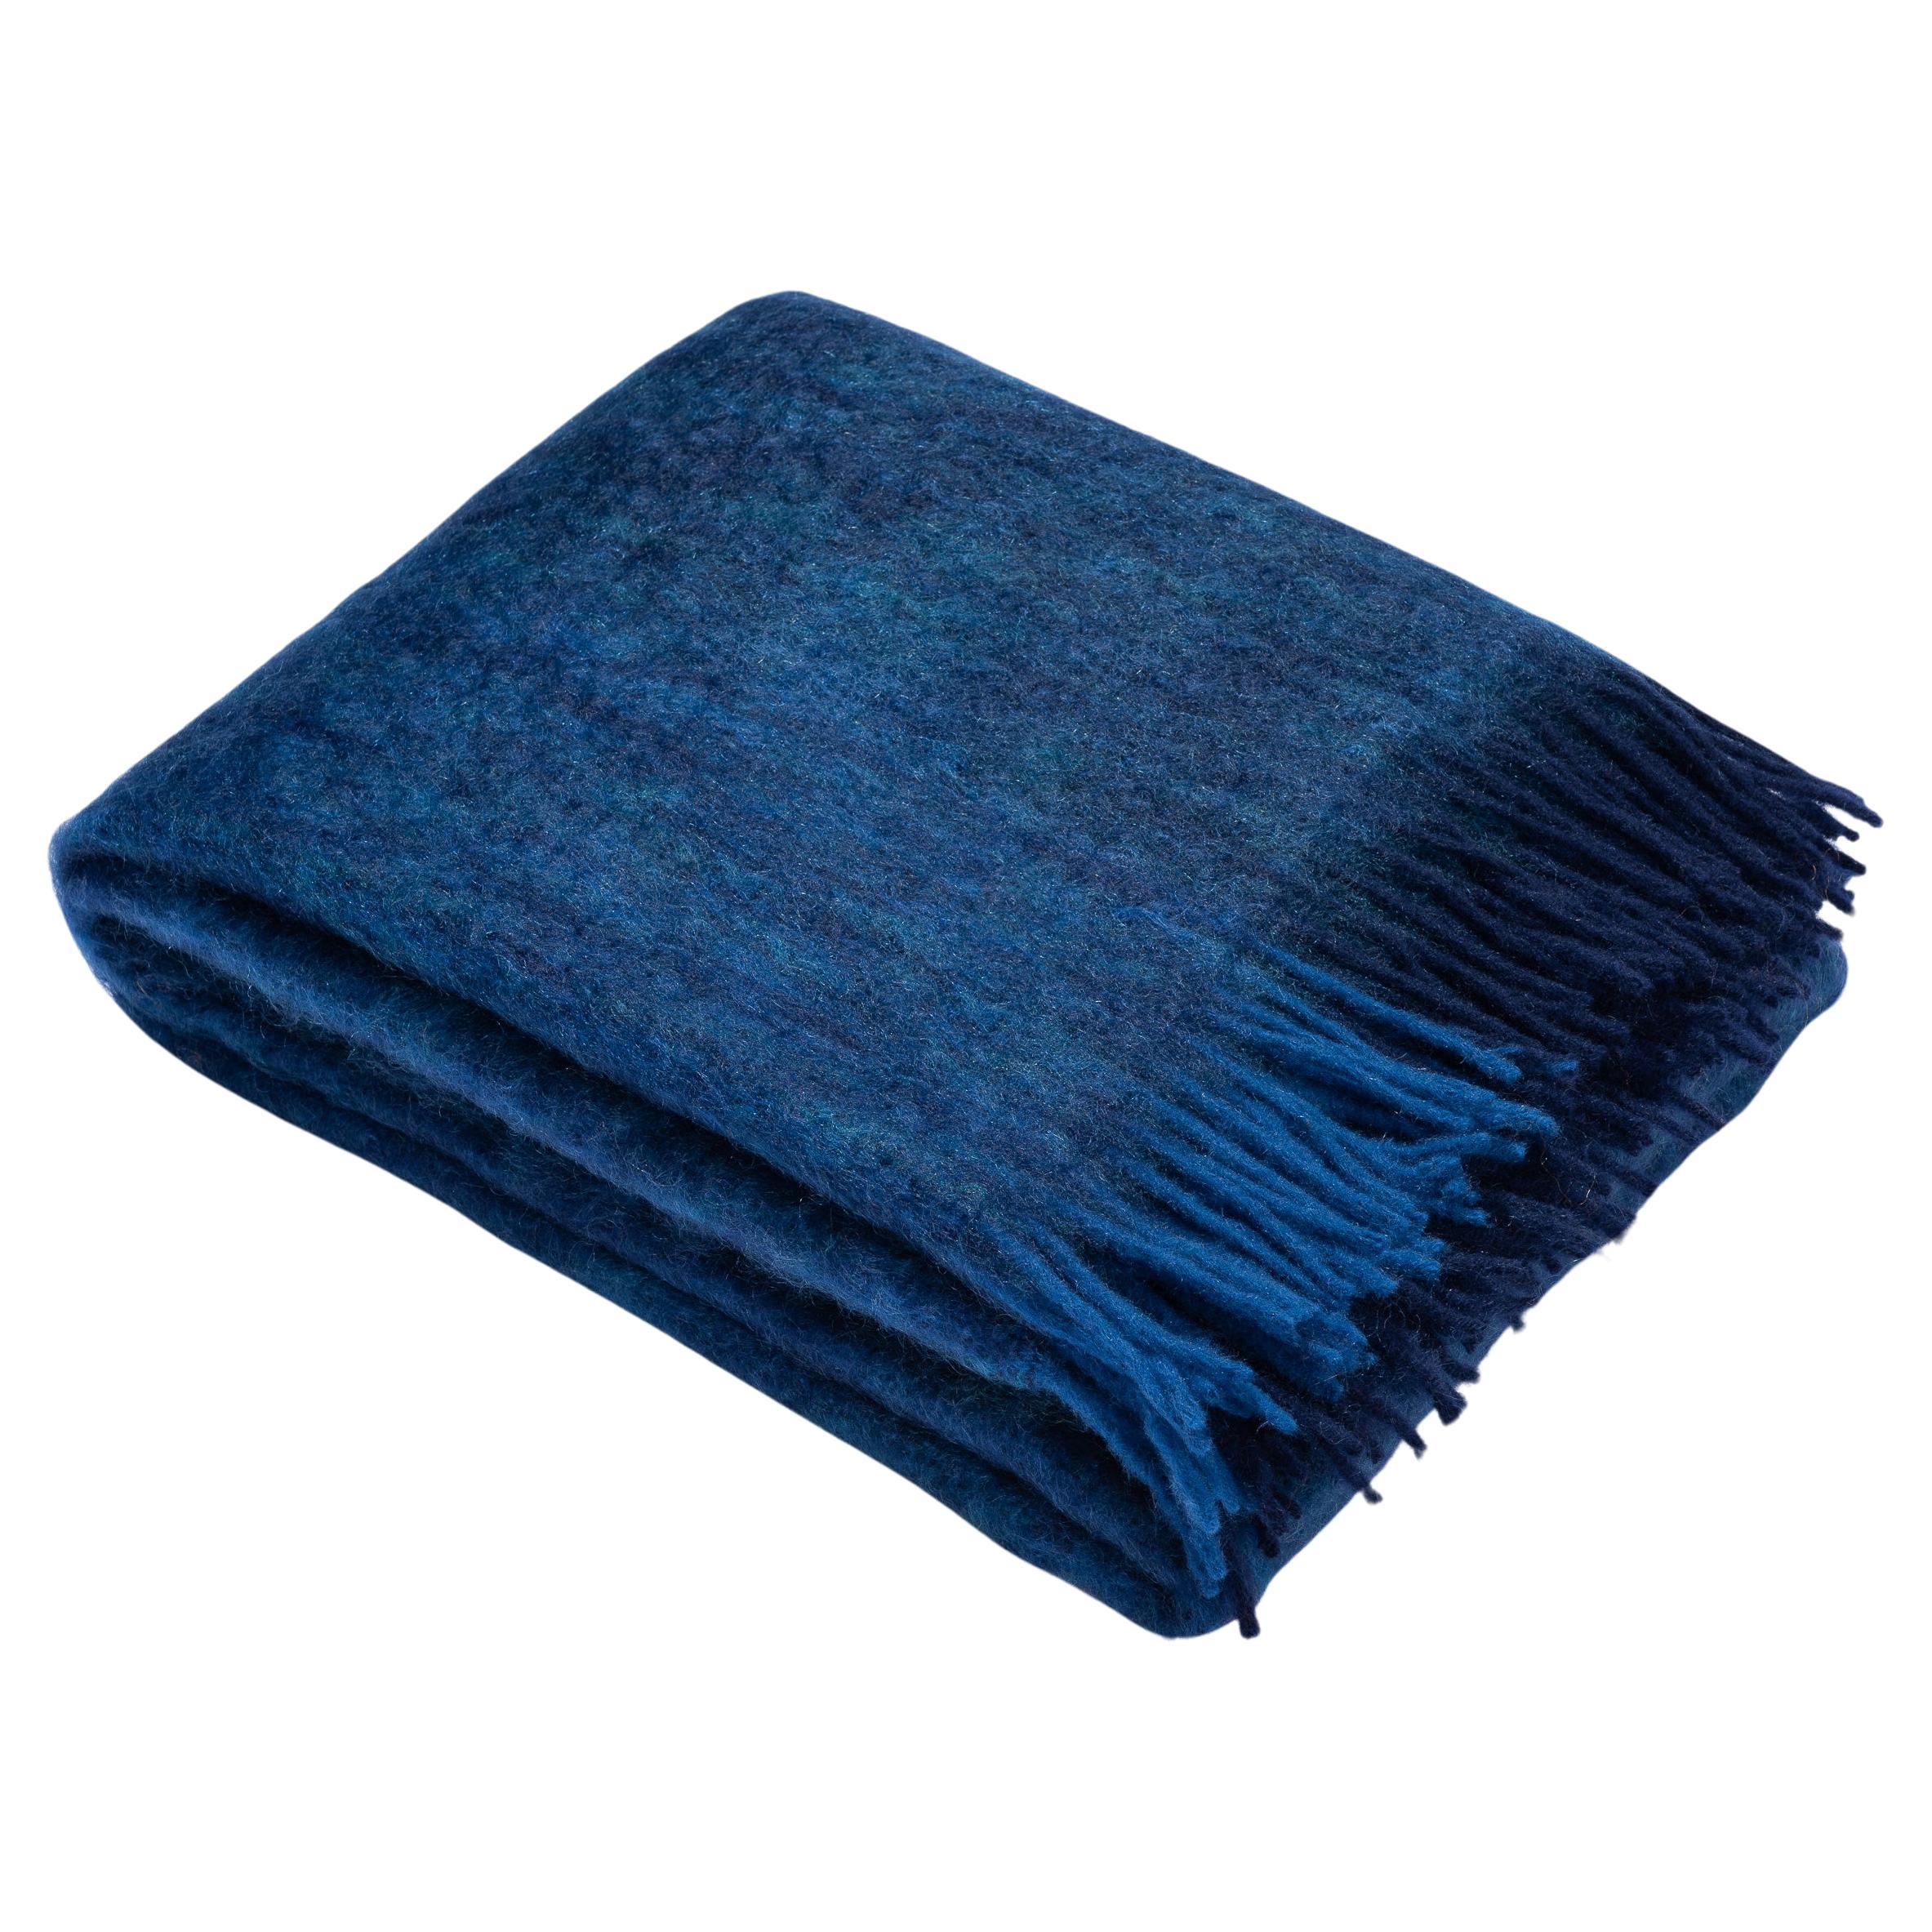 Mohair Blanket Blue Woven of Mohair and Wool by Catharina Mende For Sale